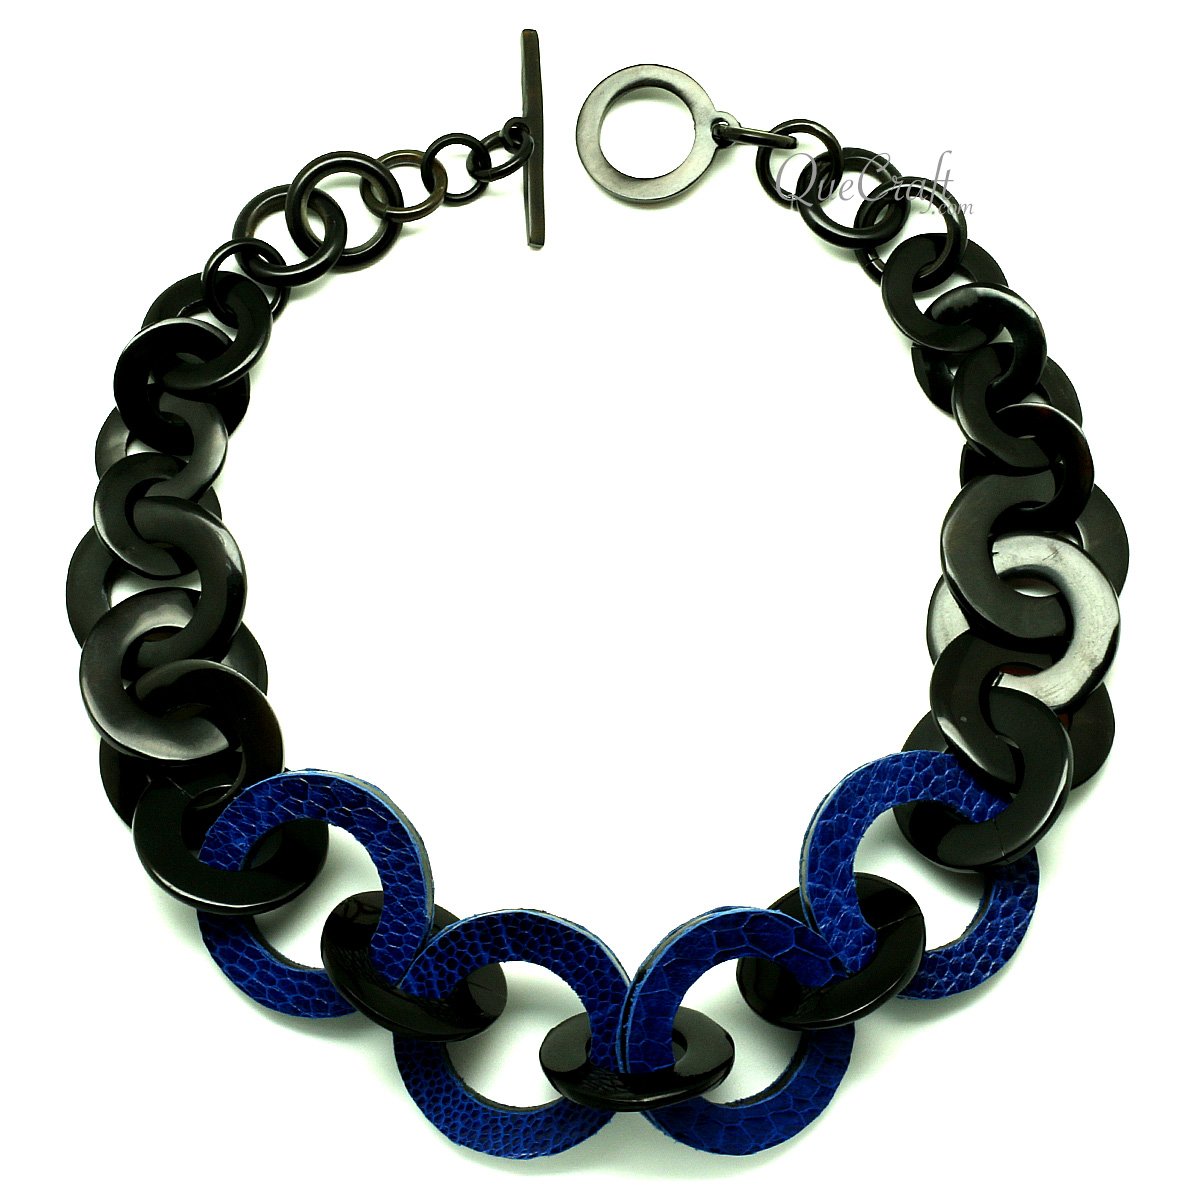 Horn & Leather Chain Necklace #12938 - HORN JEWELRY